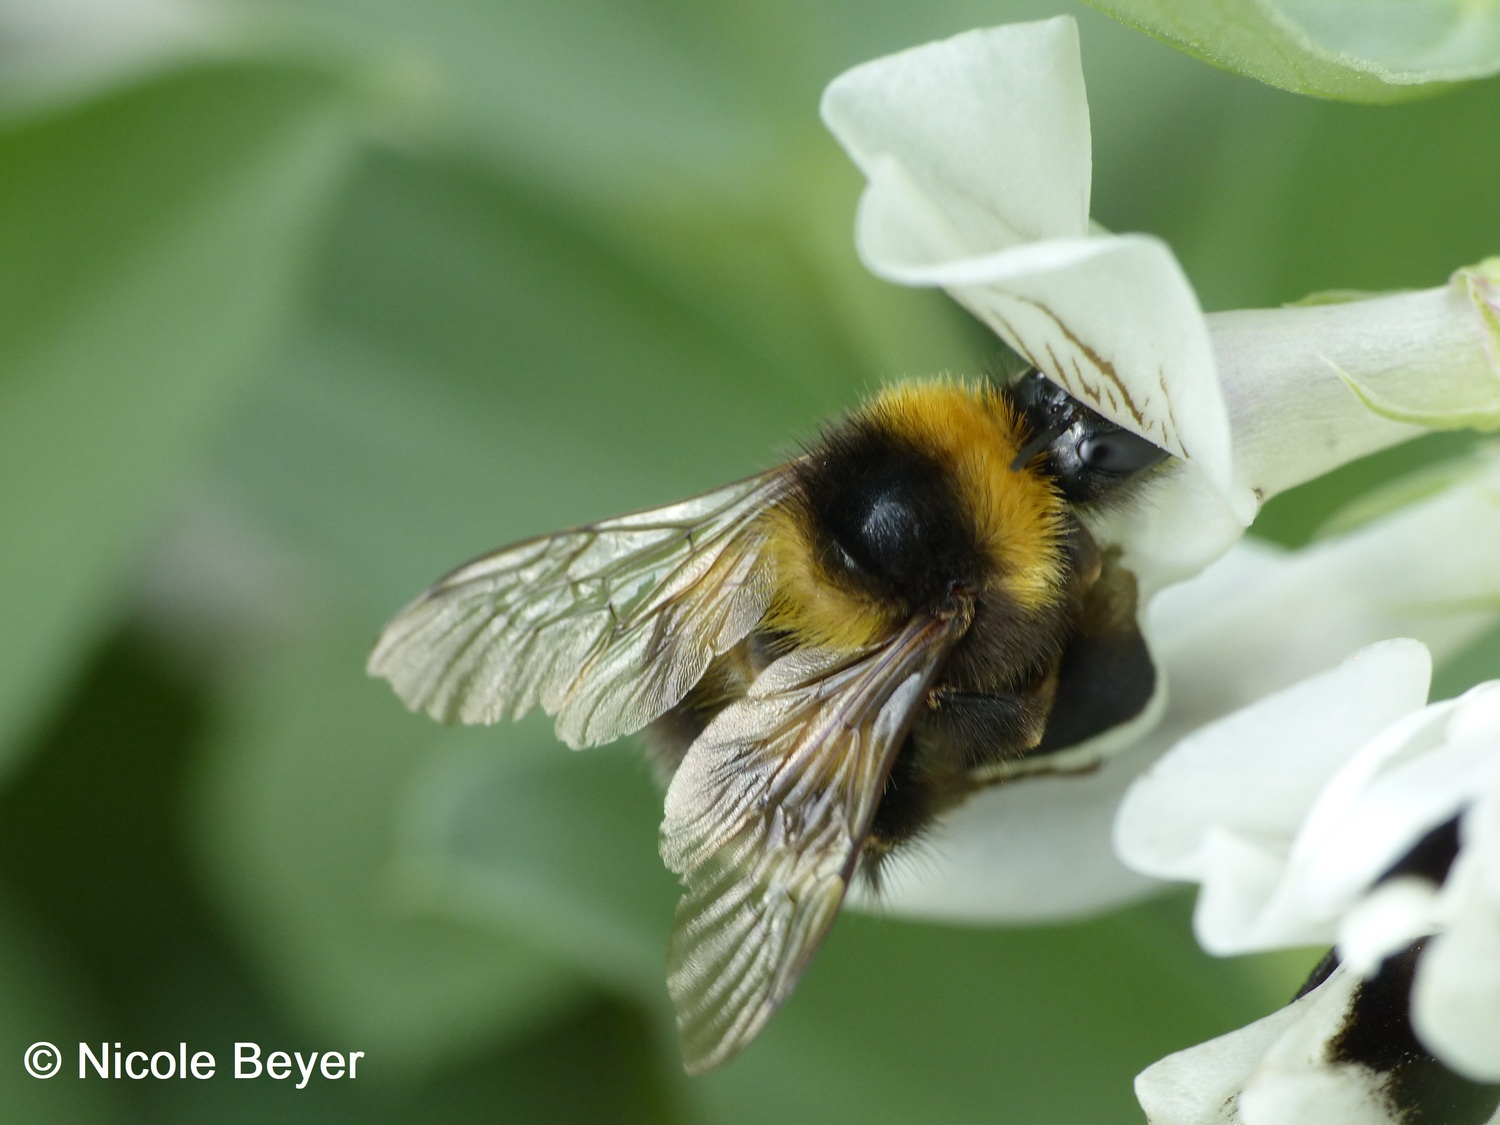 A bumblebee feeding from the flower of a faba bean